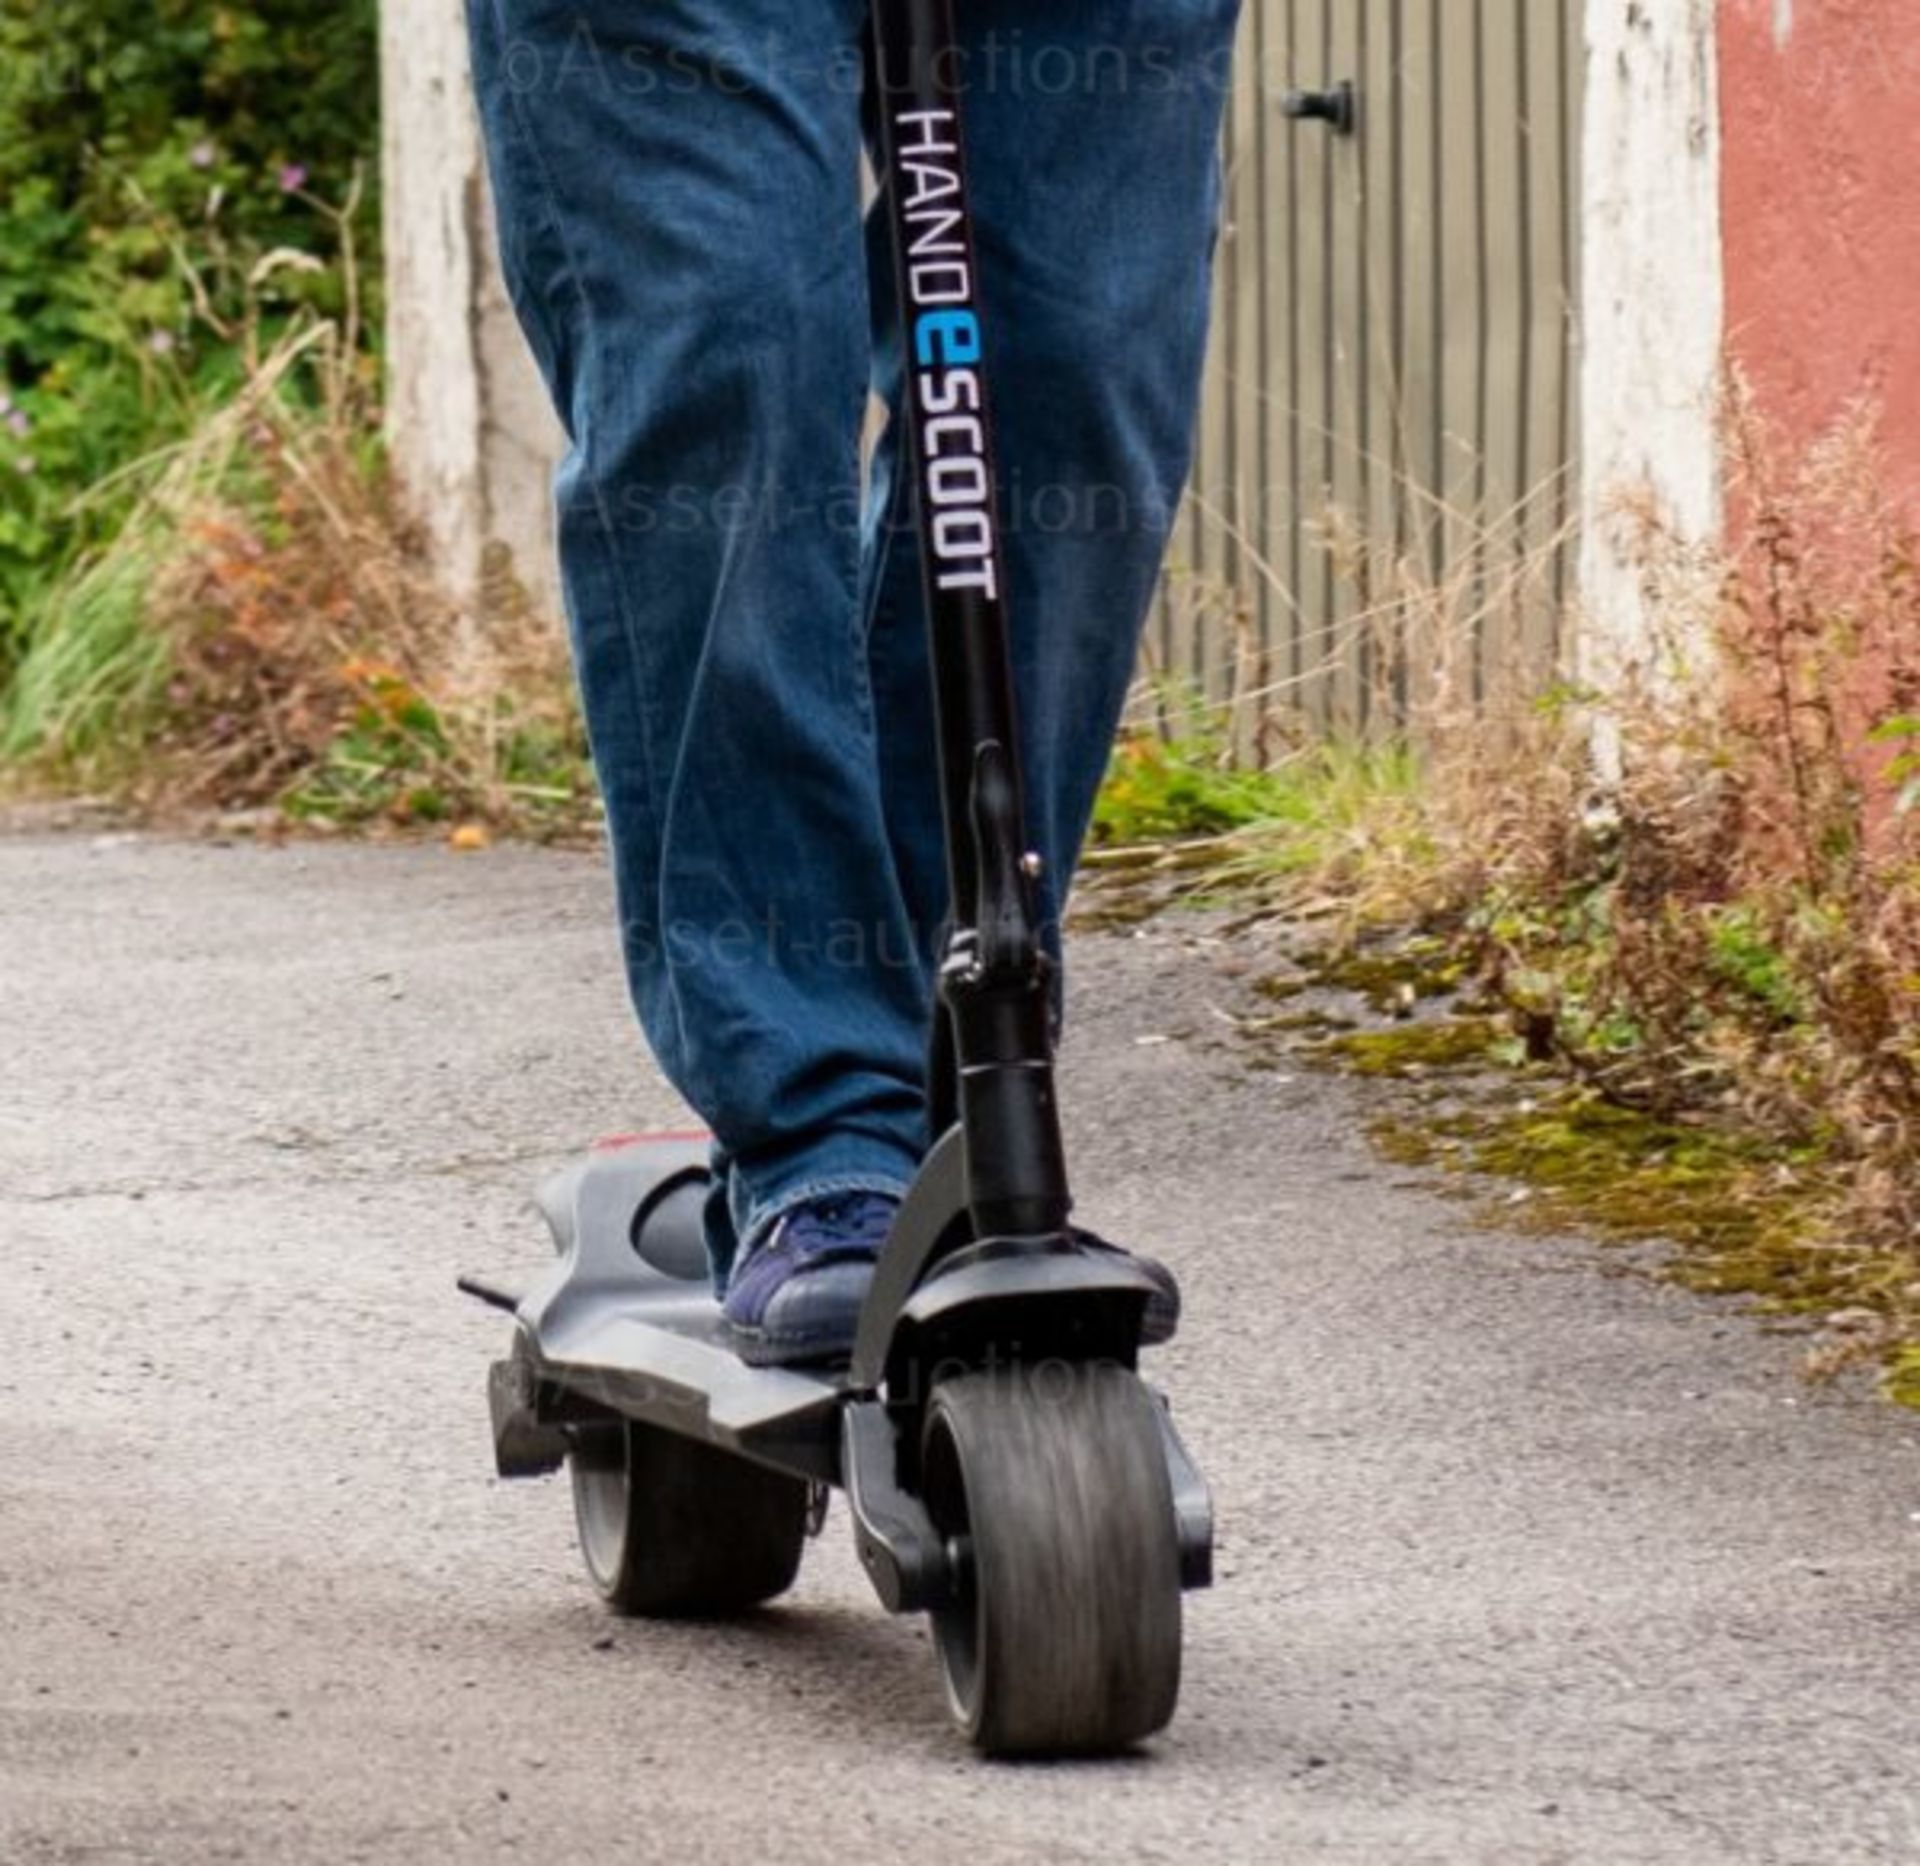 BRAND NEW HANDESCOOT ELECTRIC SCOOTER, WIDE WHEELS, £60 OF HANDESCOOT EXTRAS INCLUDED *PLUS VAT* - Image 6 of 6